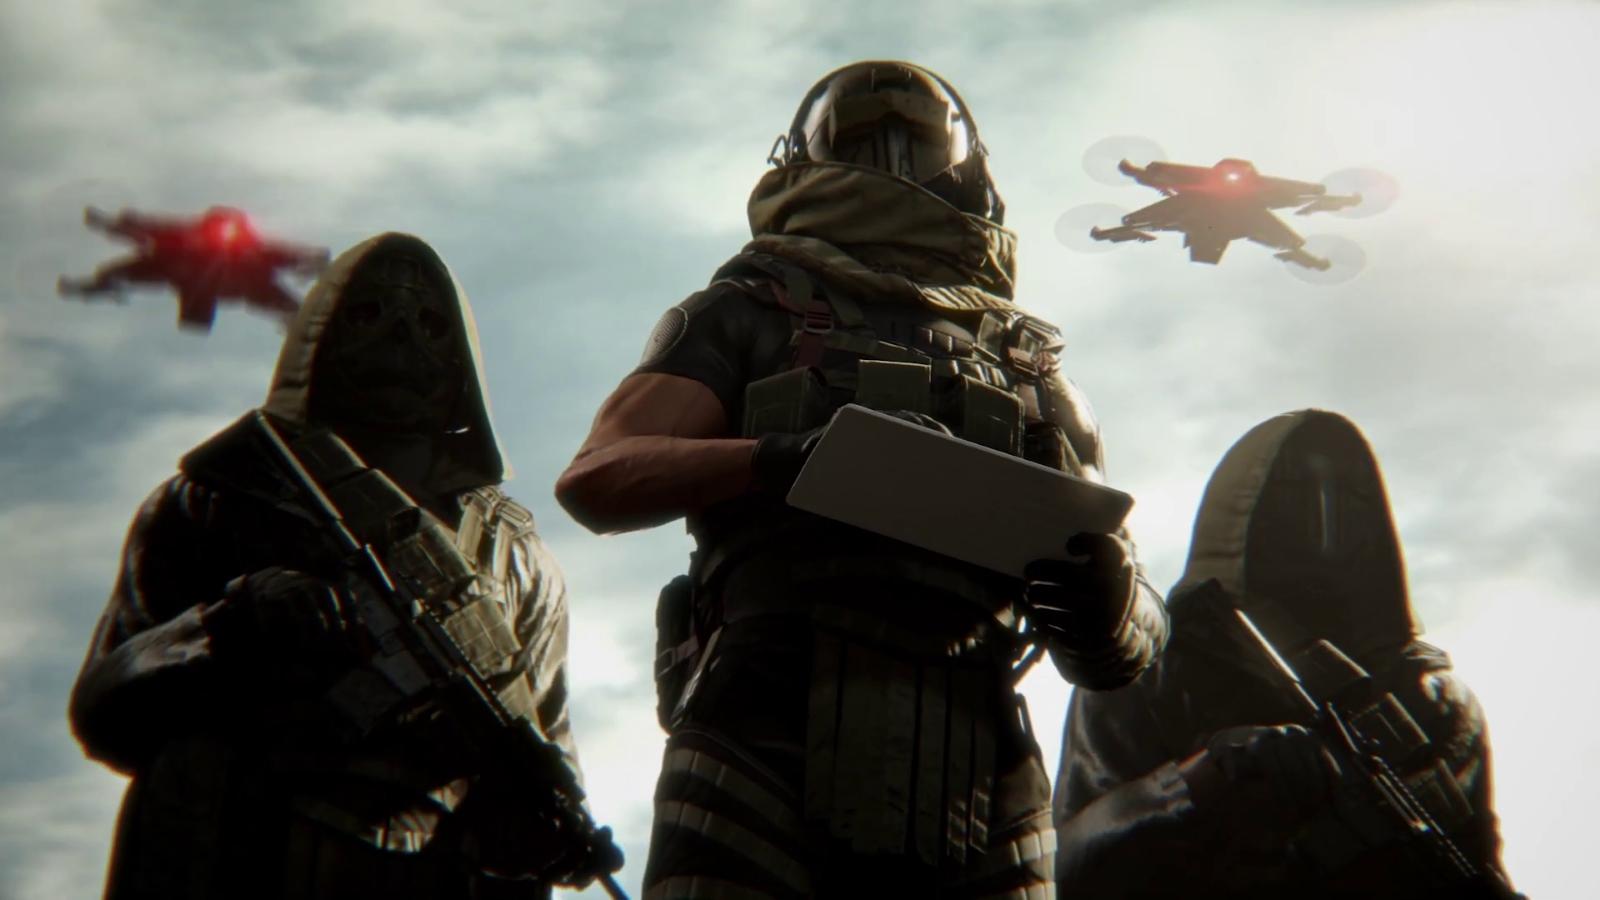 Ghost Recon Breakpoint announced and due out October 4th